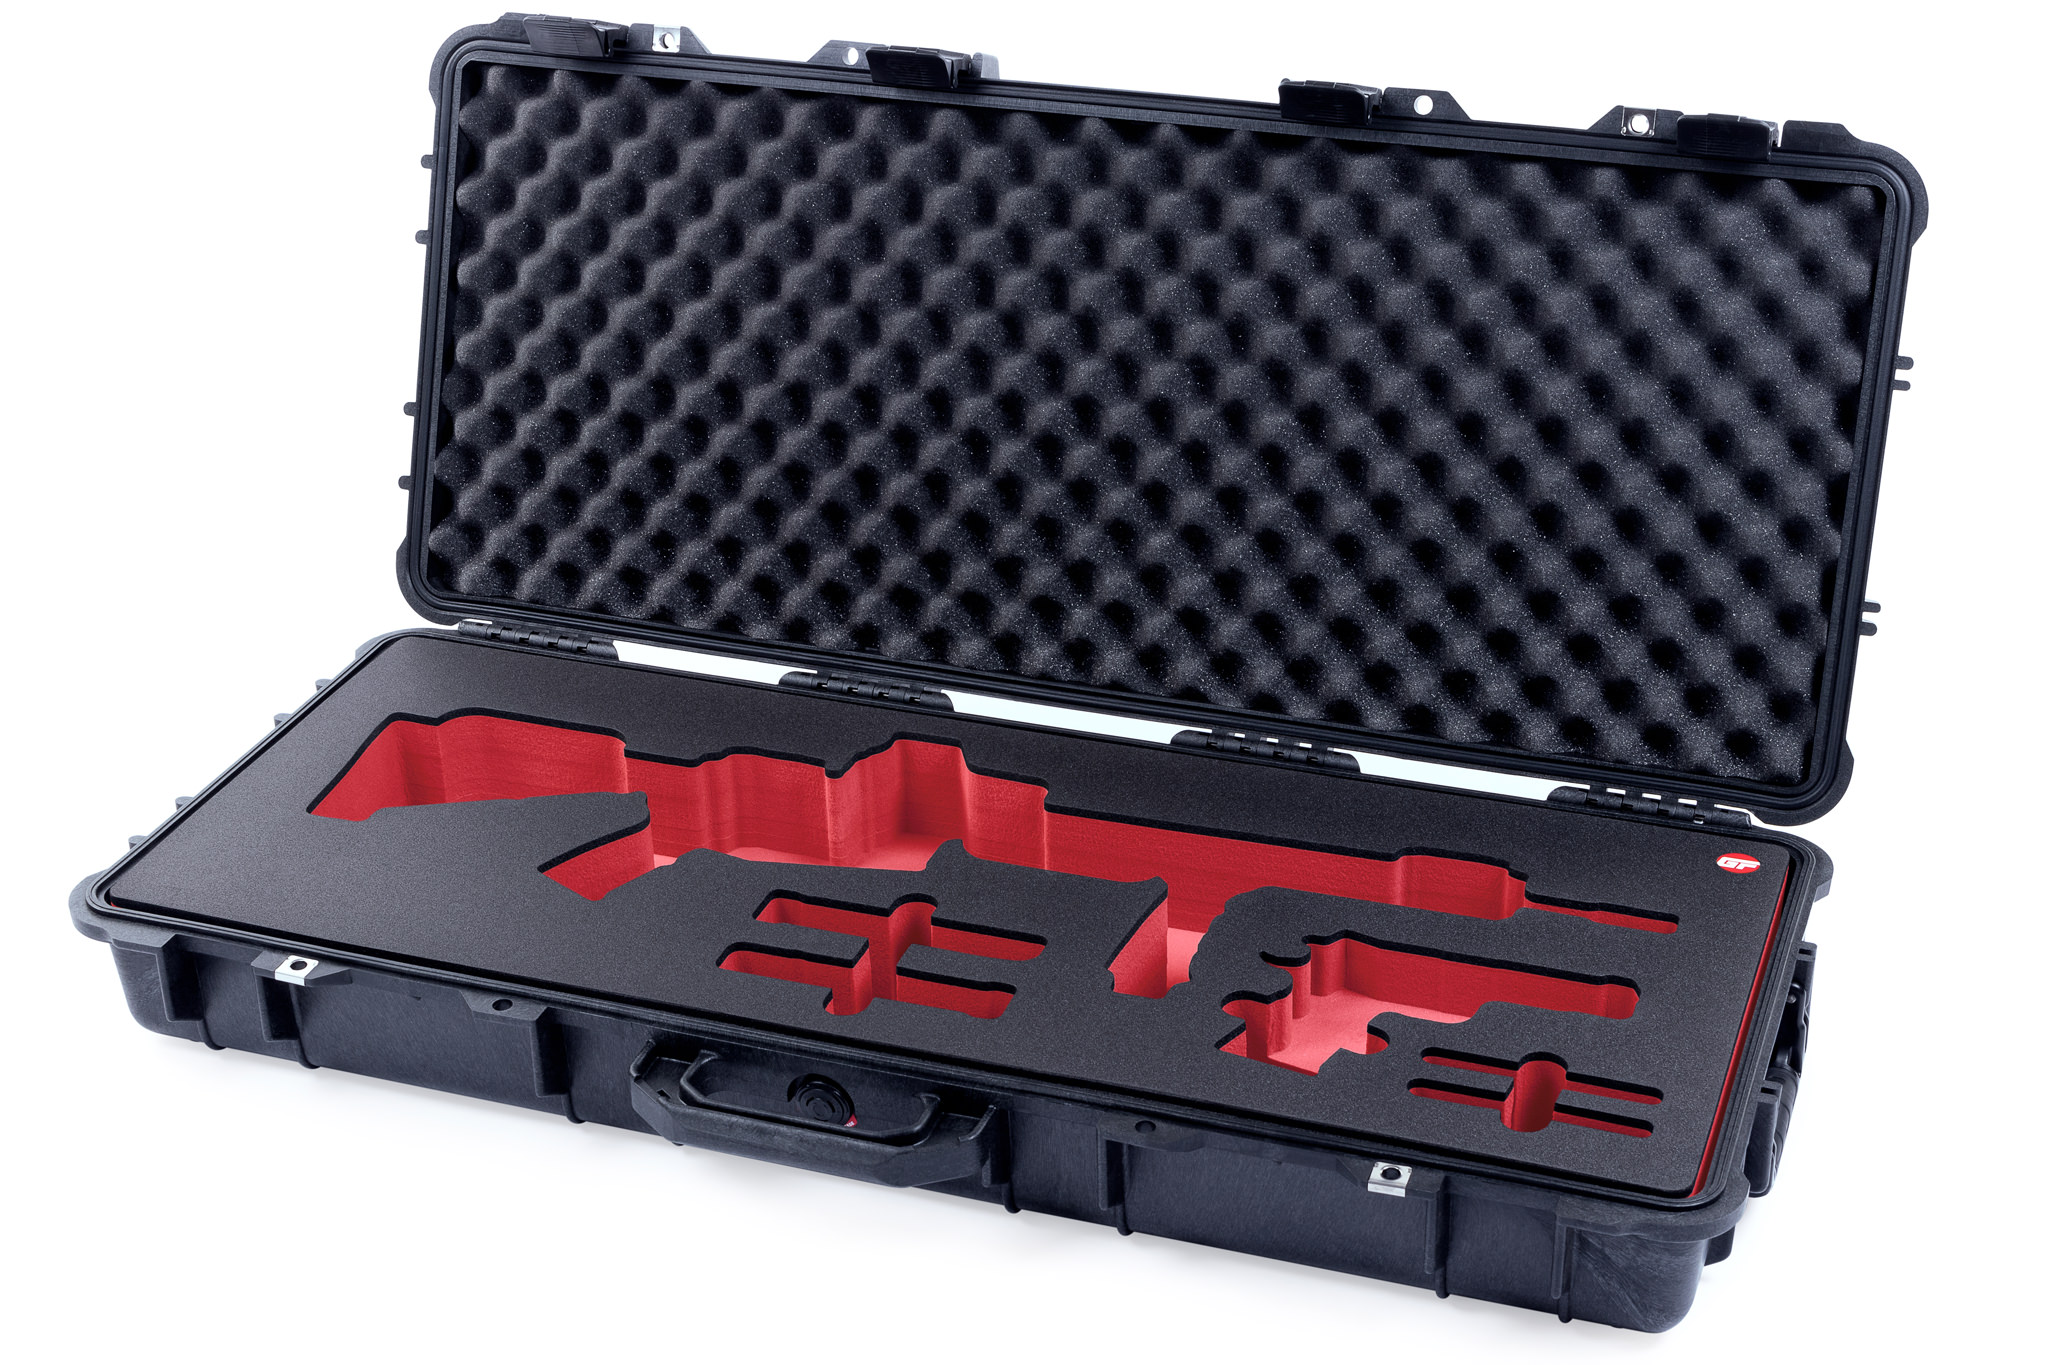 Pelican Protector 1700 Weapon Case With Foam